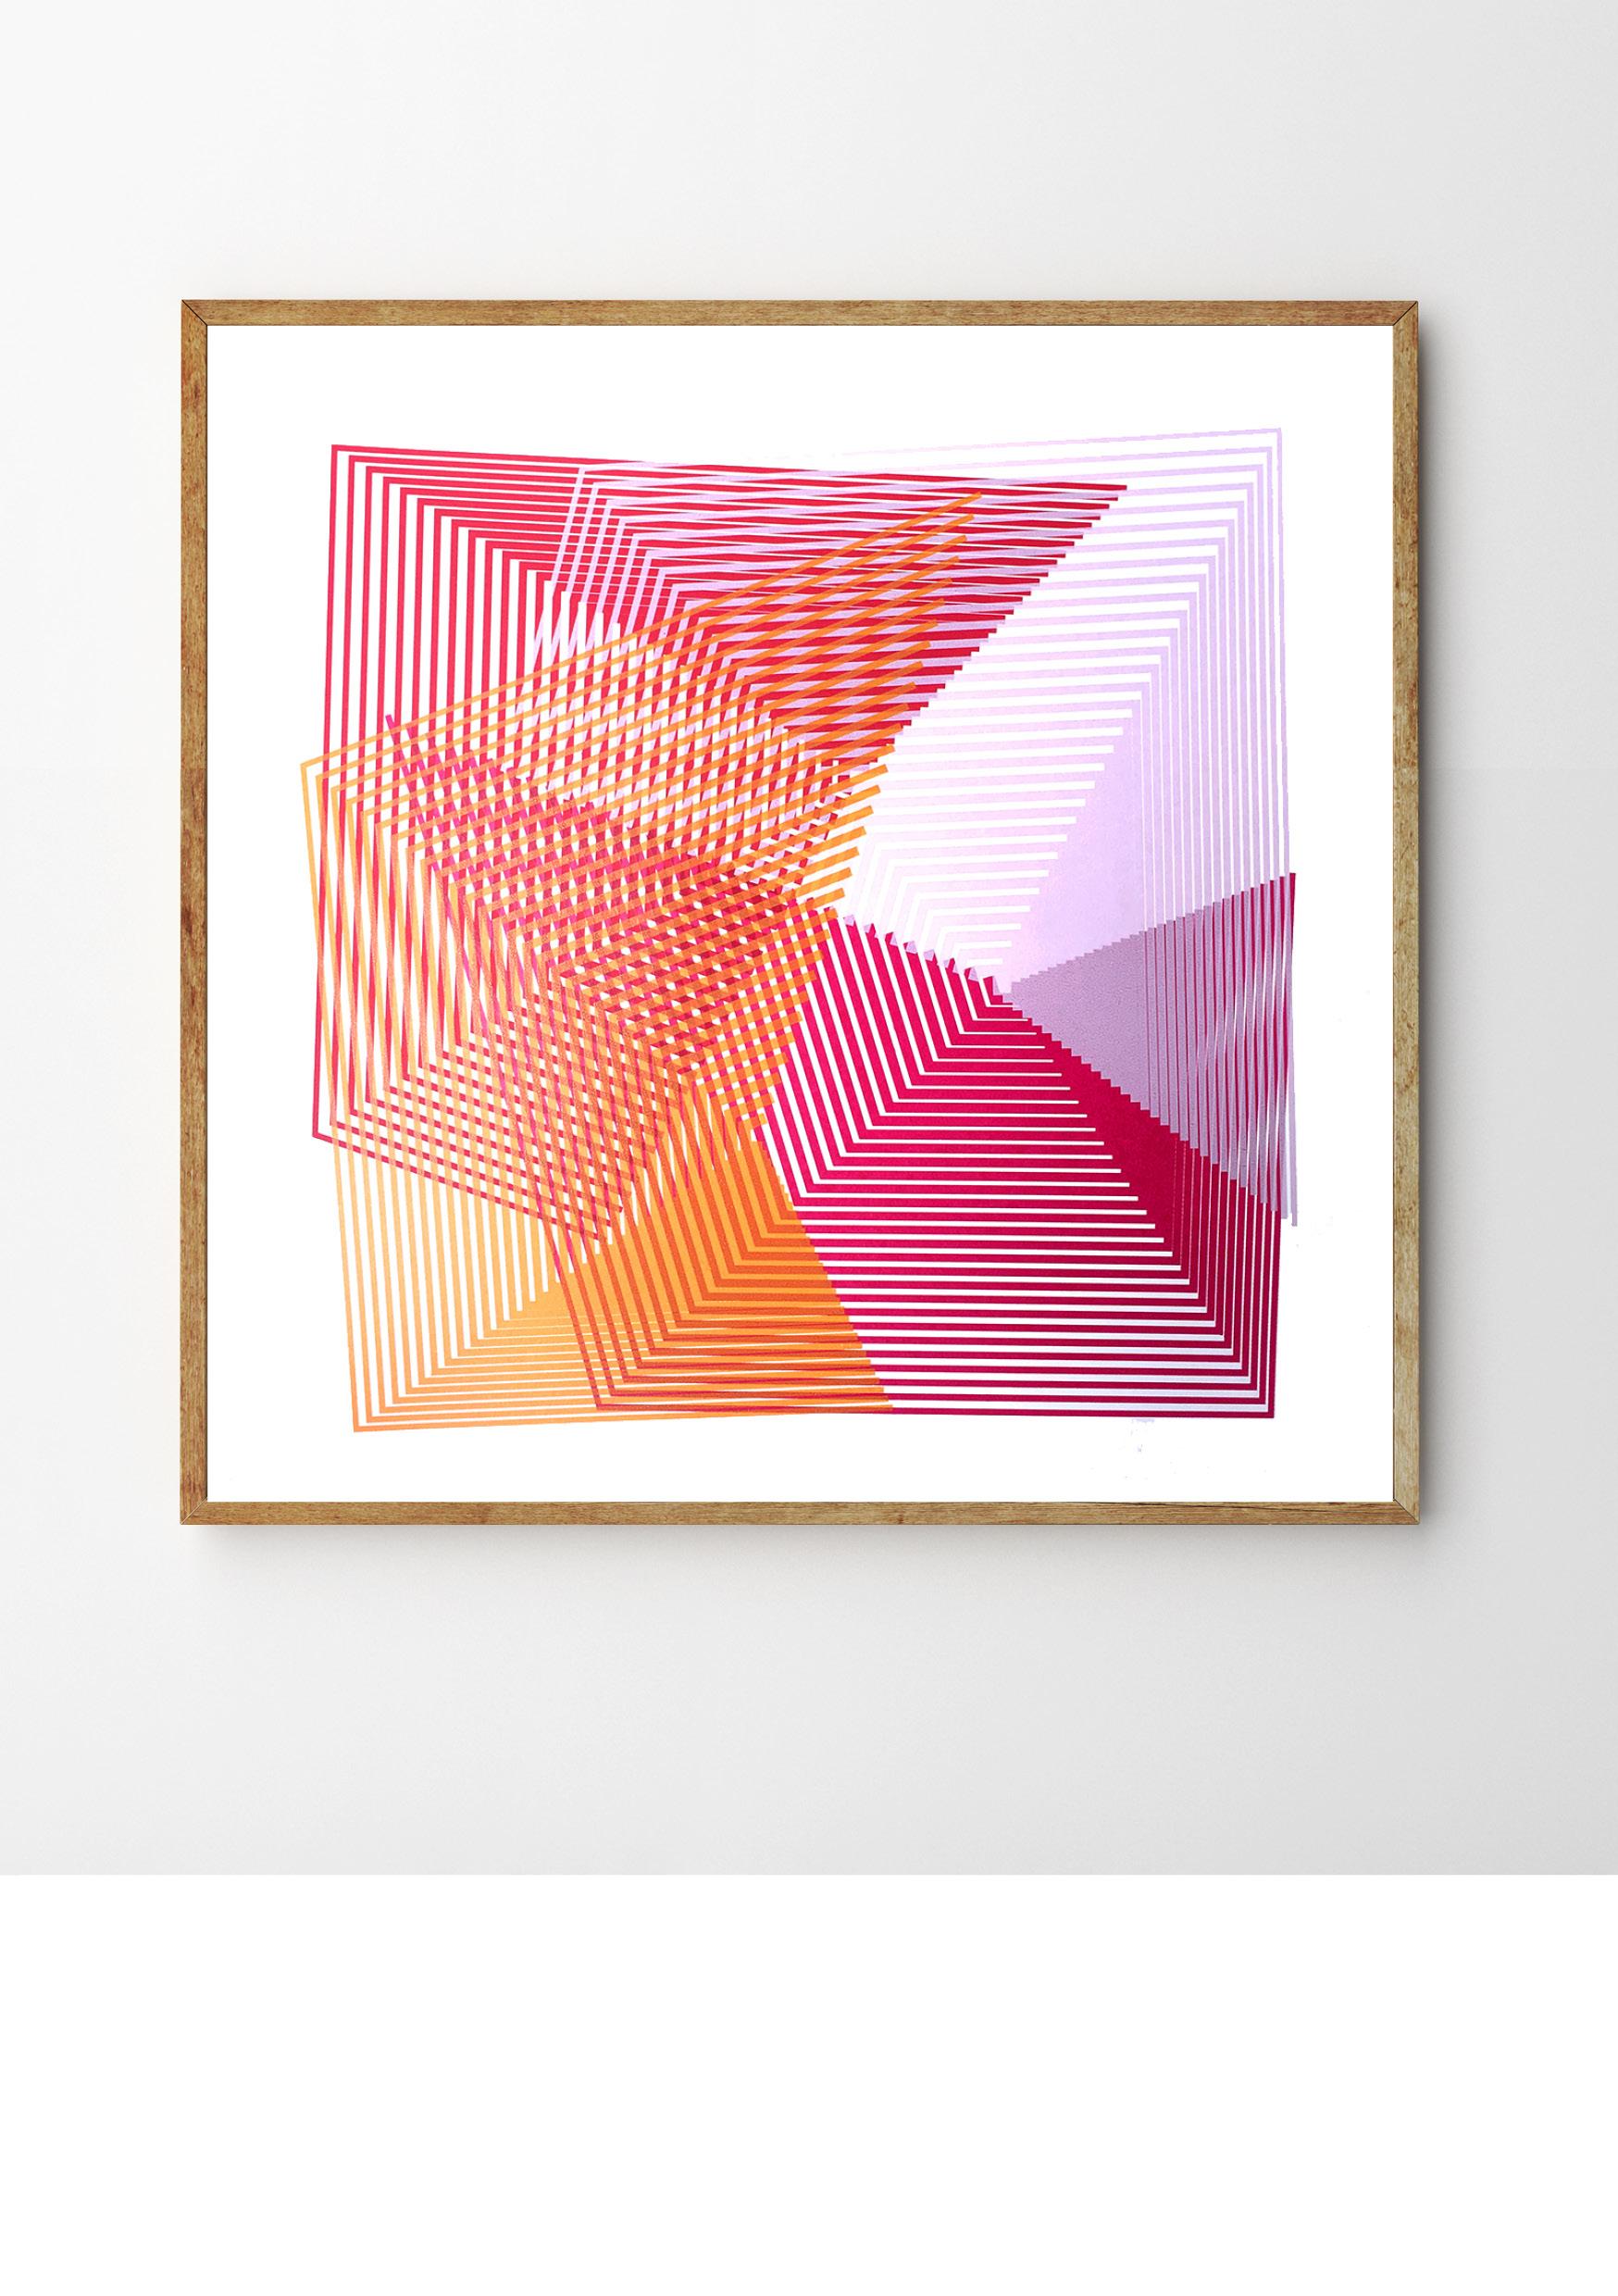 Brand new in October 2018. A multiple layered abstract limited edition screenprint by Kate Banazi.  

Limited edition of only 5. Printed using hand mixed colour making this a valued investment and collectible piece. This is a hand printed artwork